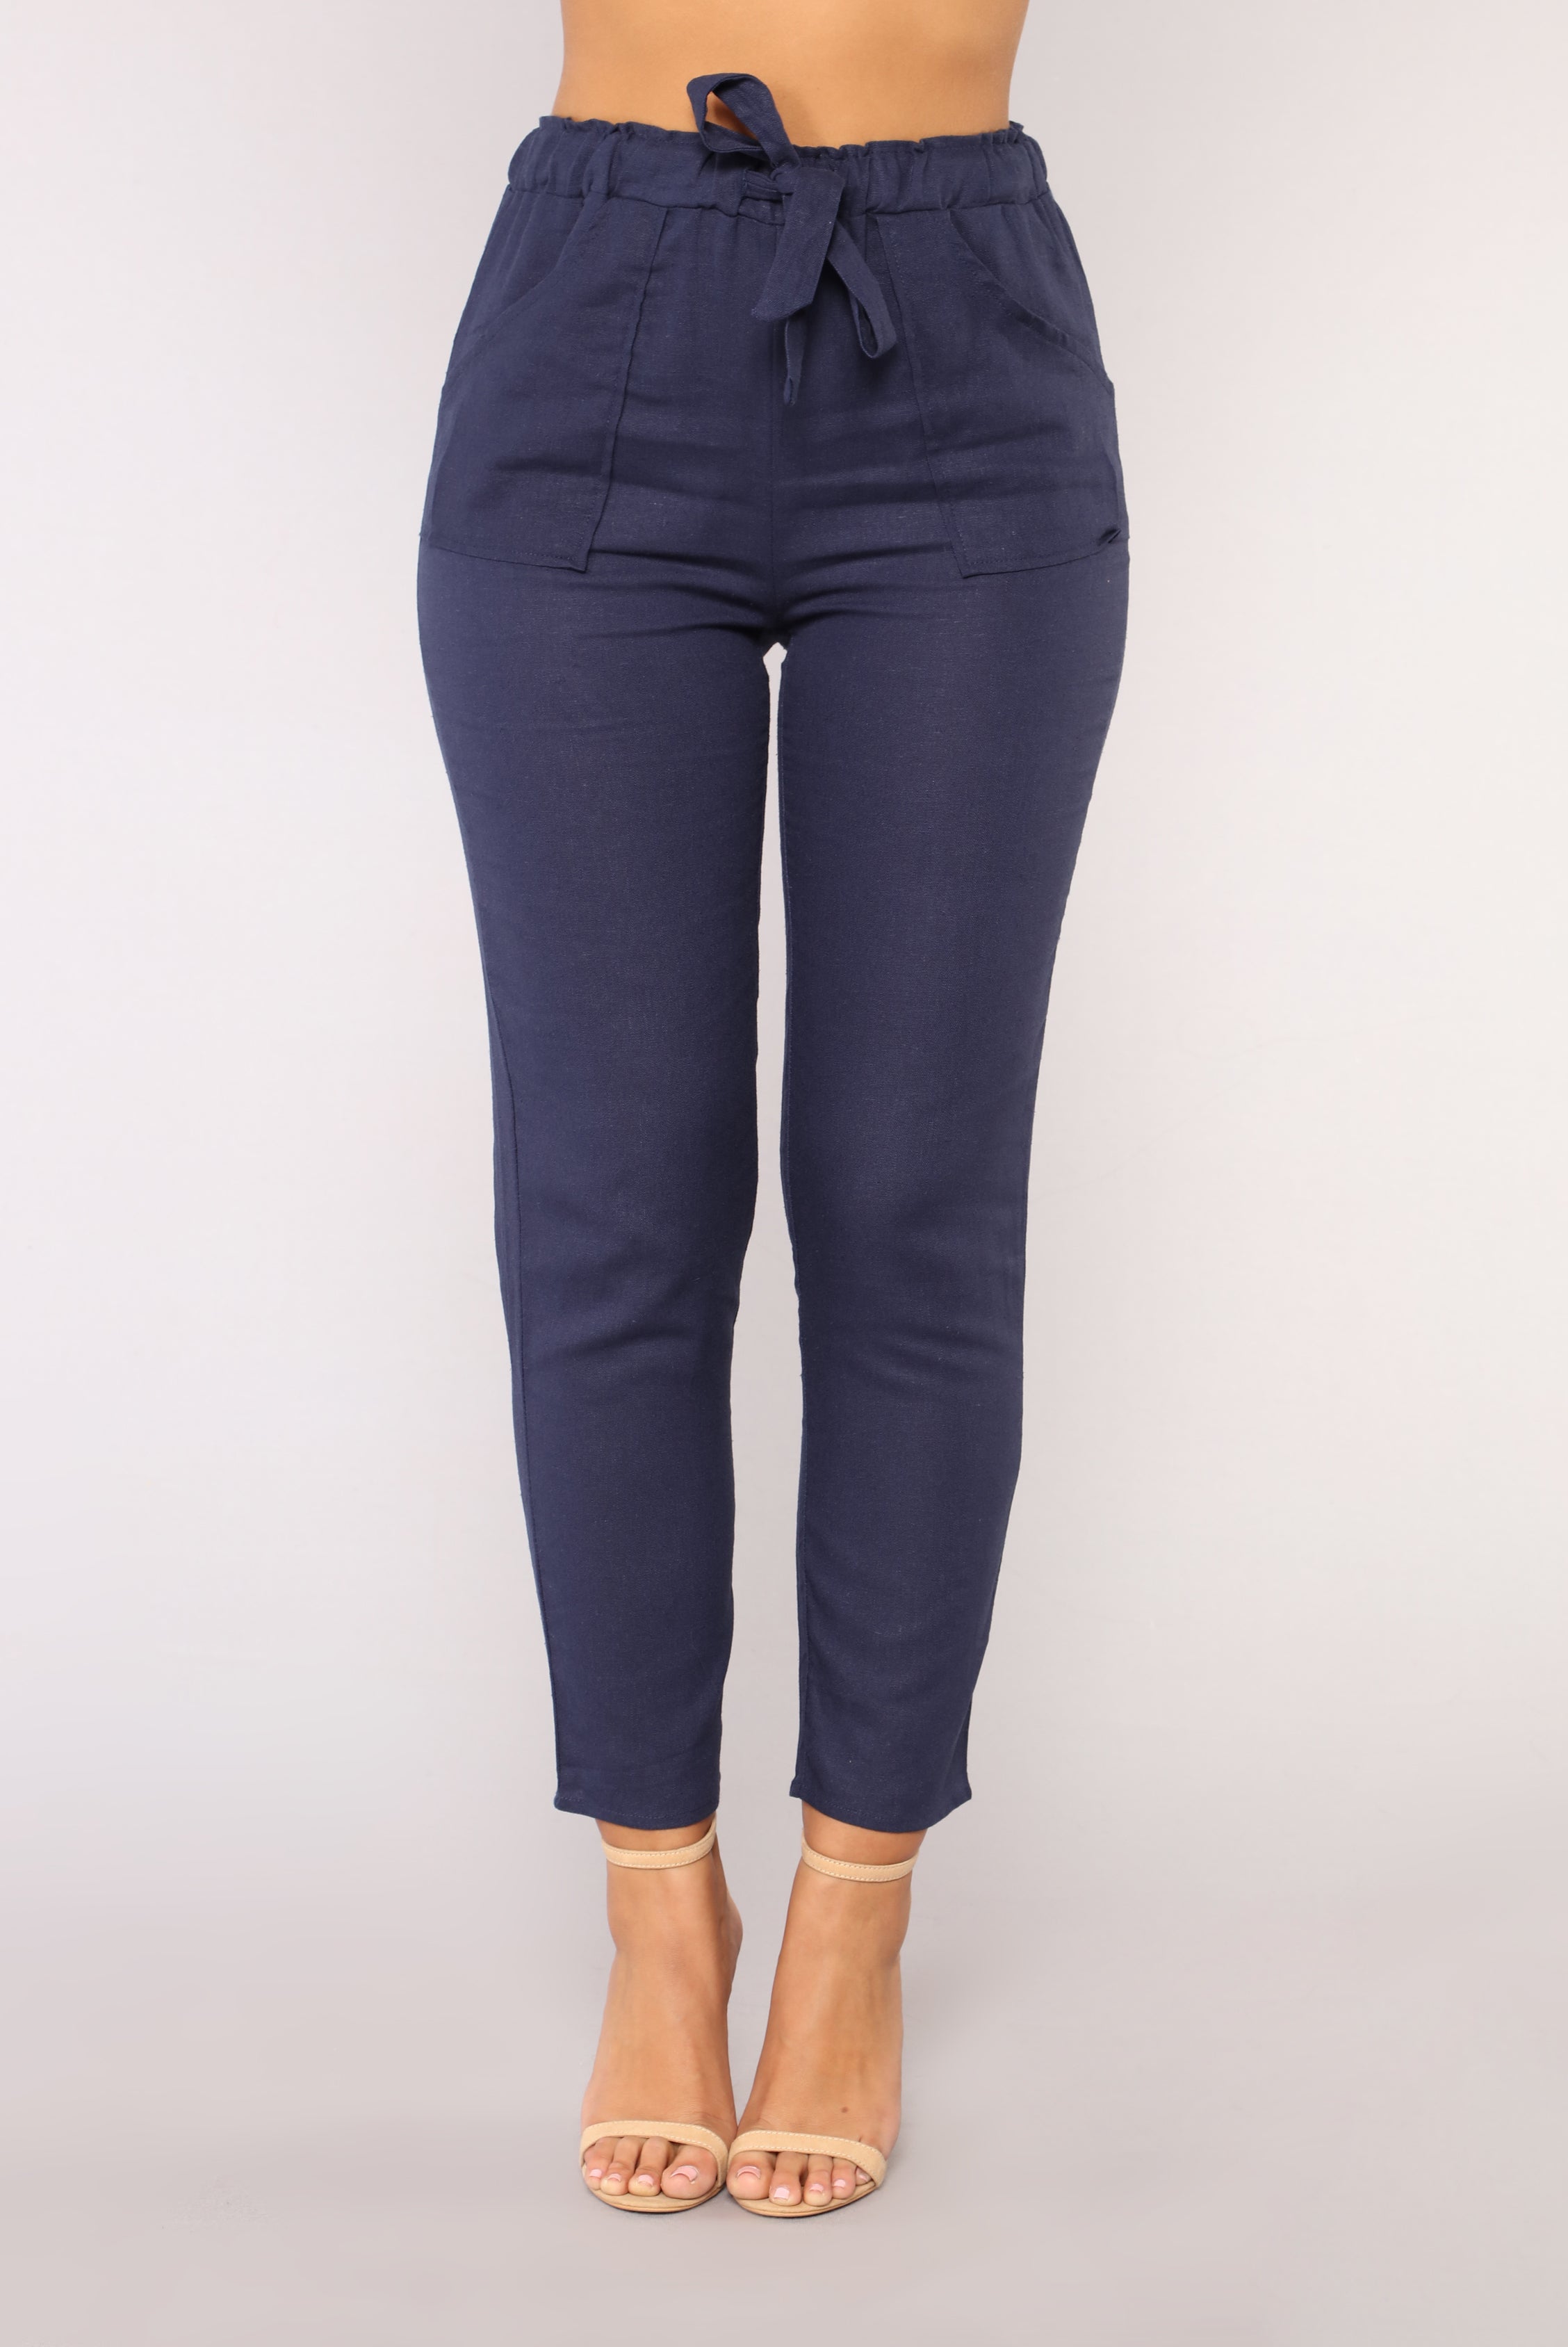 All Tied Up Pants - Navy